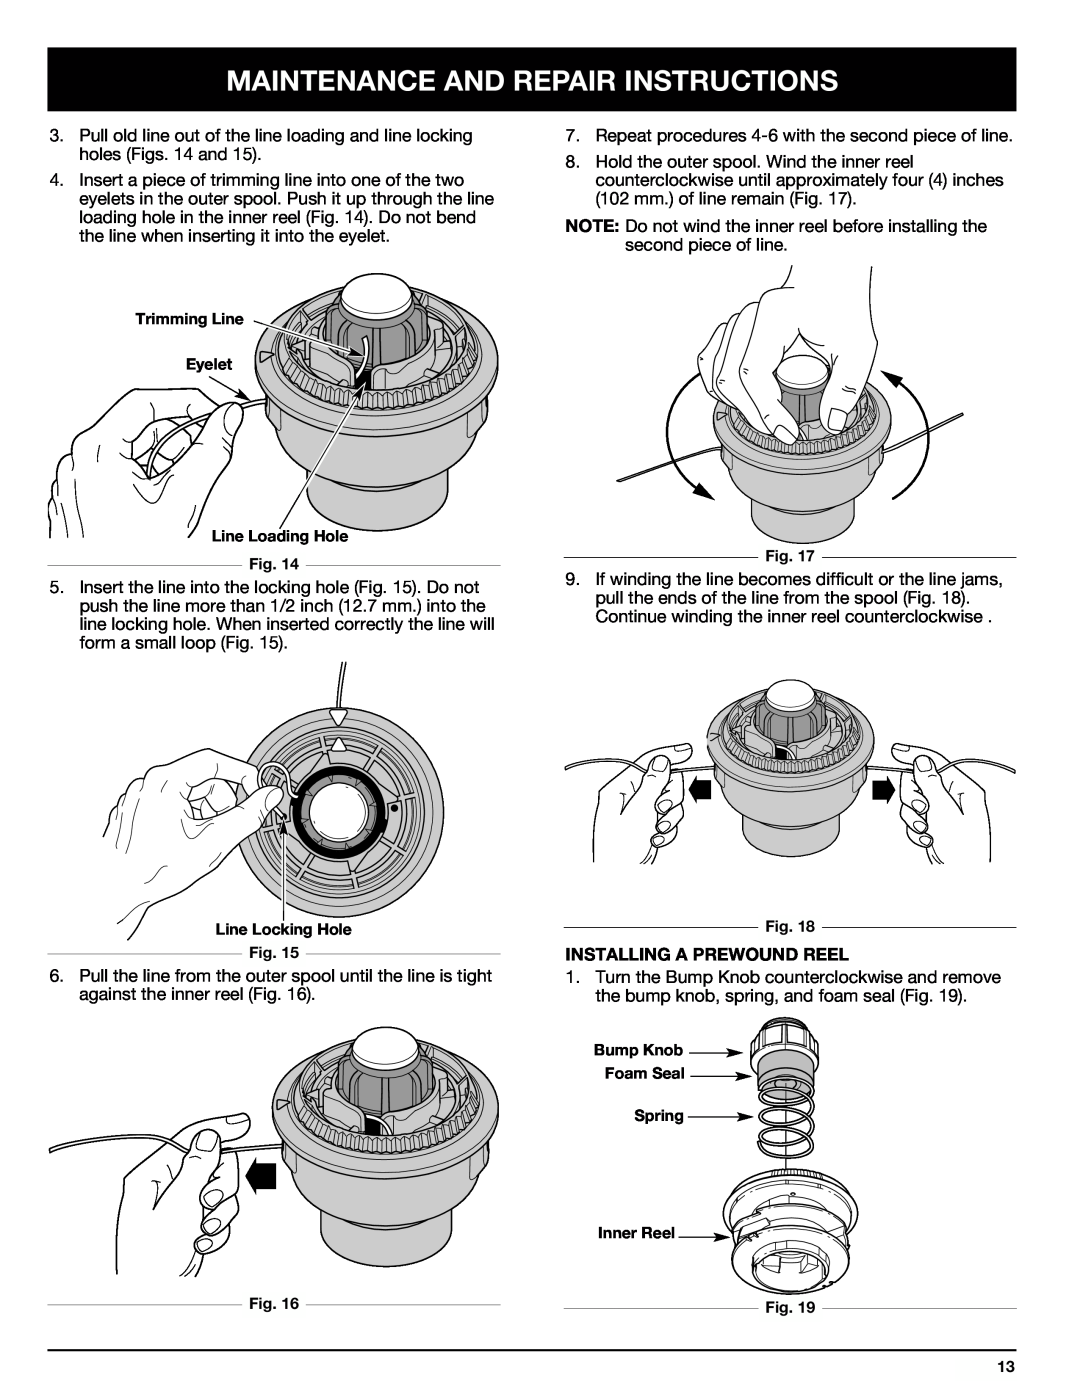 Ryobi 767rj Maintenance And Repair Instructions, Installing A Prewound Reel, Trimming Line Eyelet Line Loading Hole Fig 